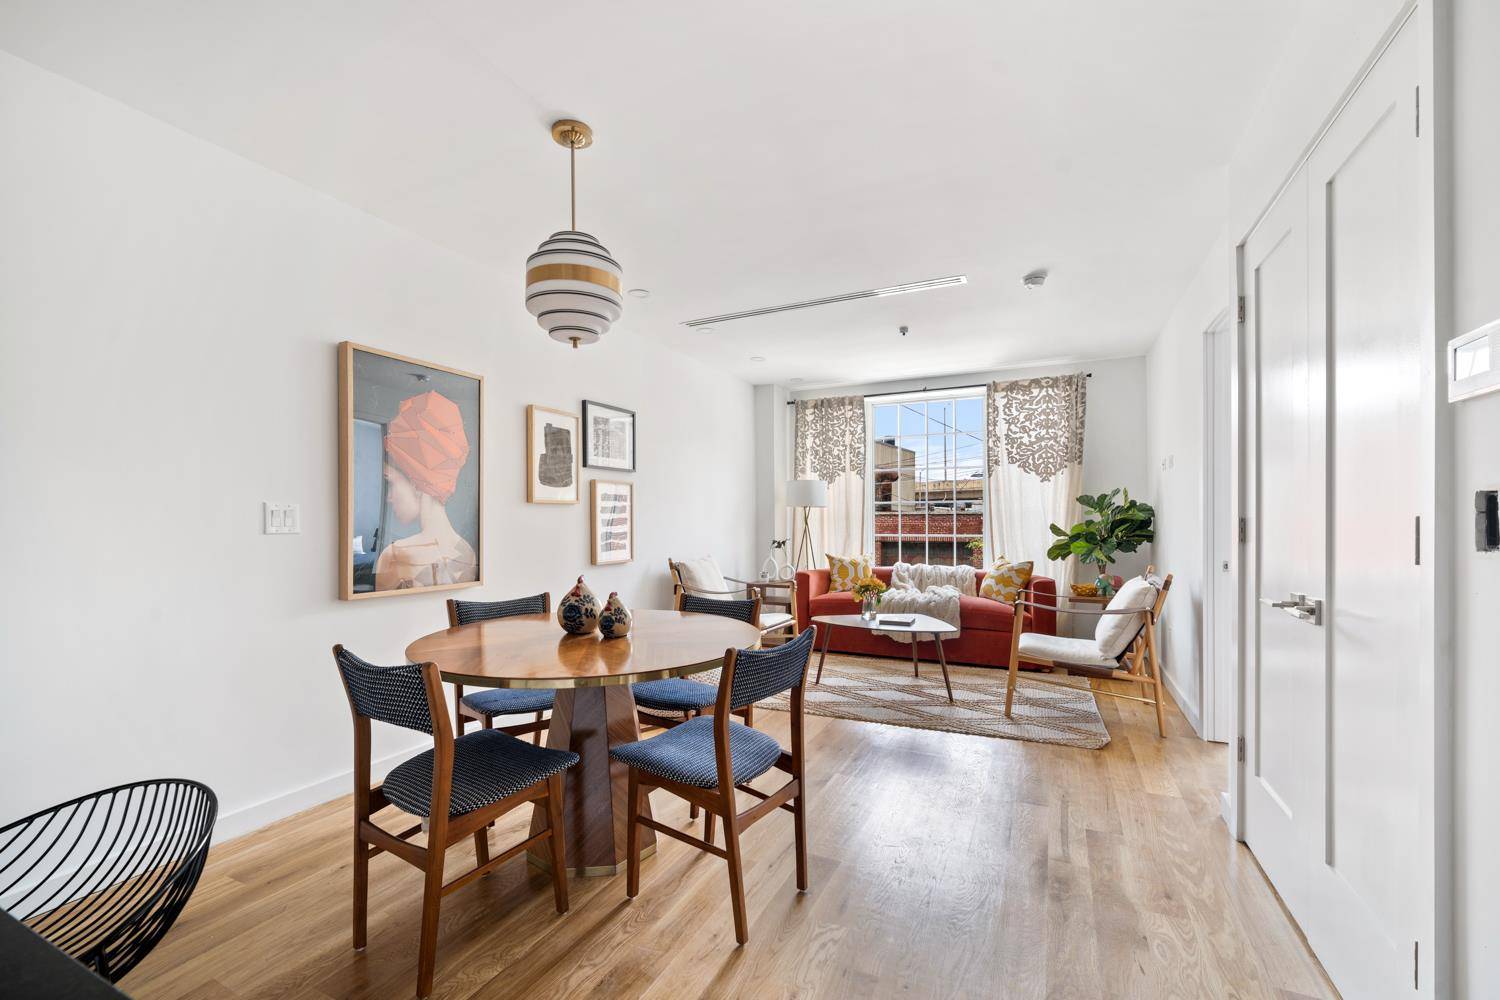 Welcome to 52 Herbert ! A boutique condominium perfectly positioned on the Williamsburg Greenpoint border, close to everything Willaimsburg and Greenpoint have to offer while tranquilly abounds on this picturesque, ...